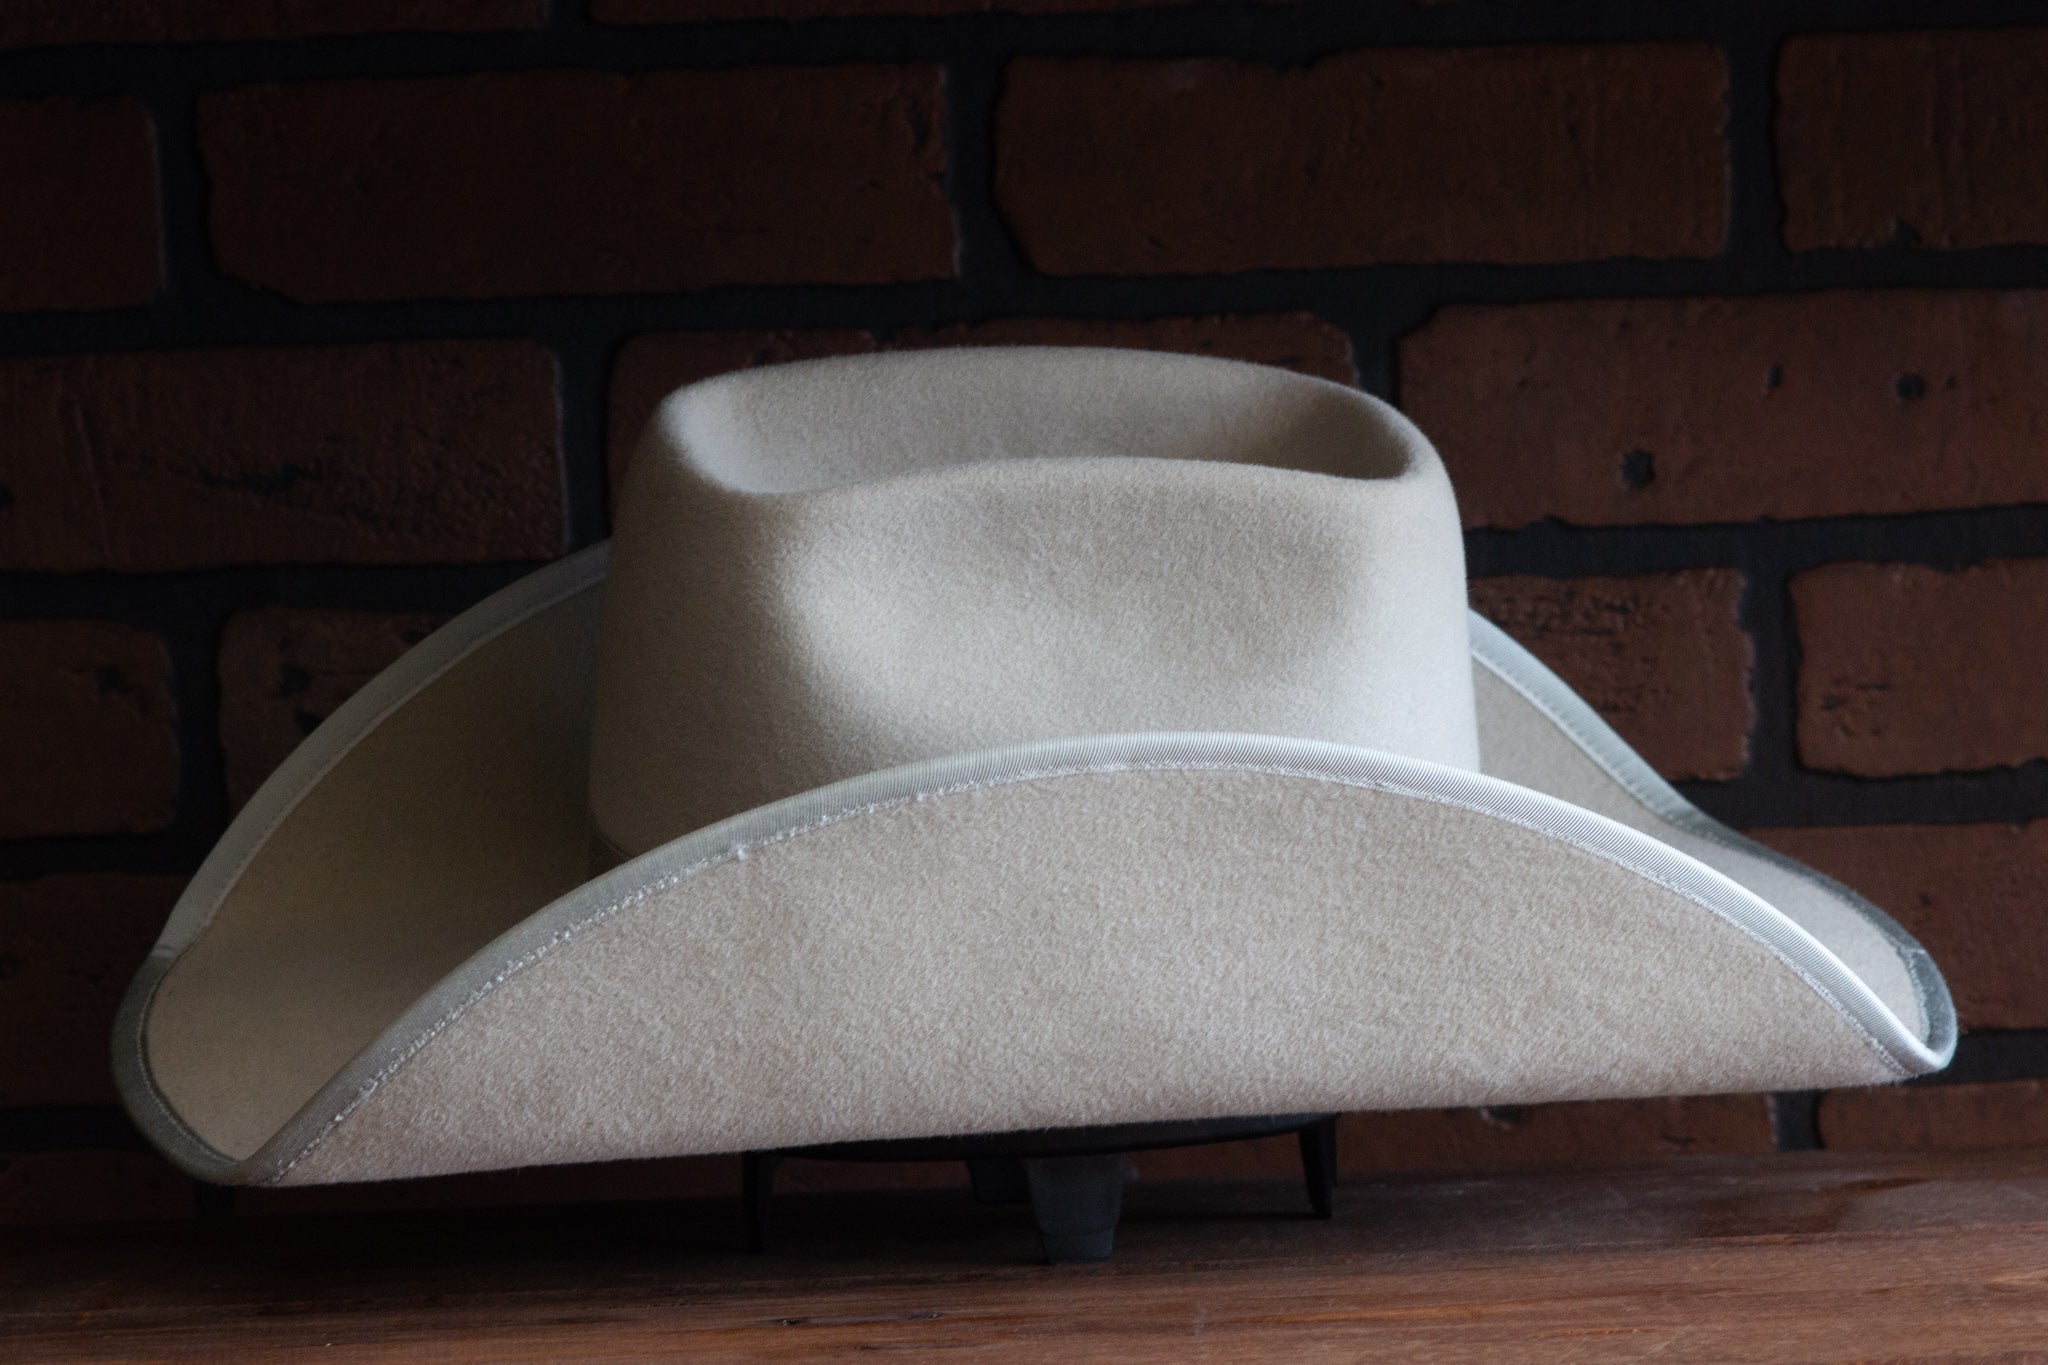 “West Texas” style fender-fold Cowboy hat inspired by the one we created for Bob Dylan